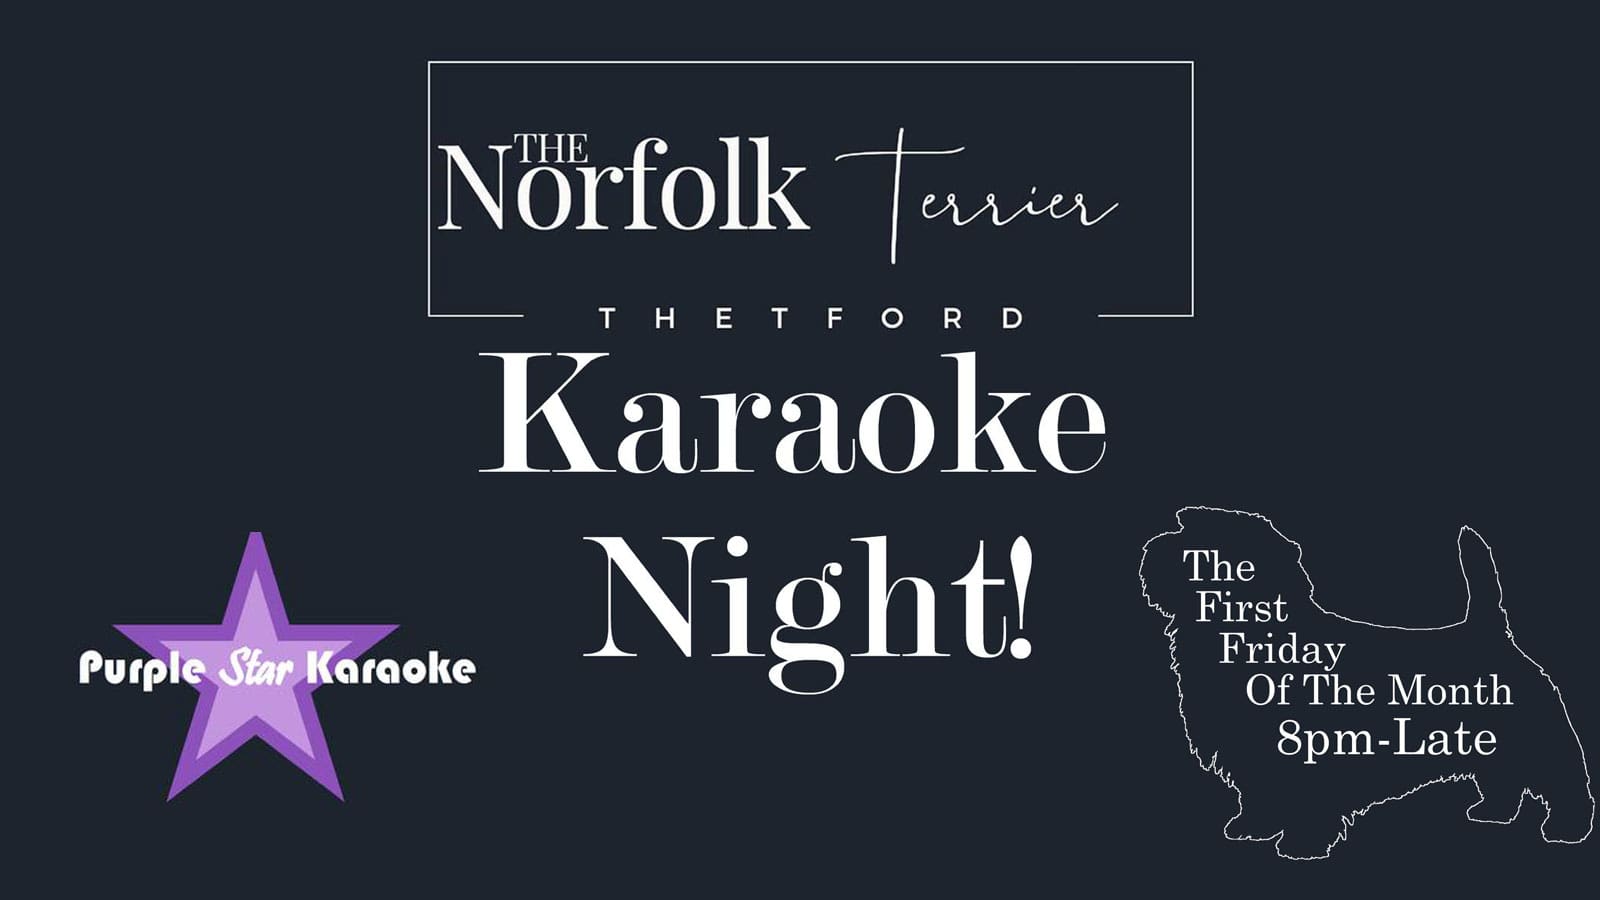 Thetford Bubbly Hub what's on and events Norfolk Terrier Karaoke